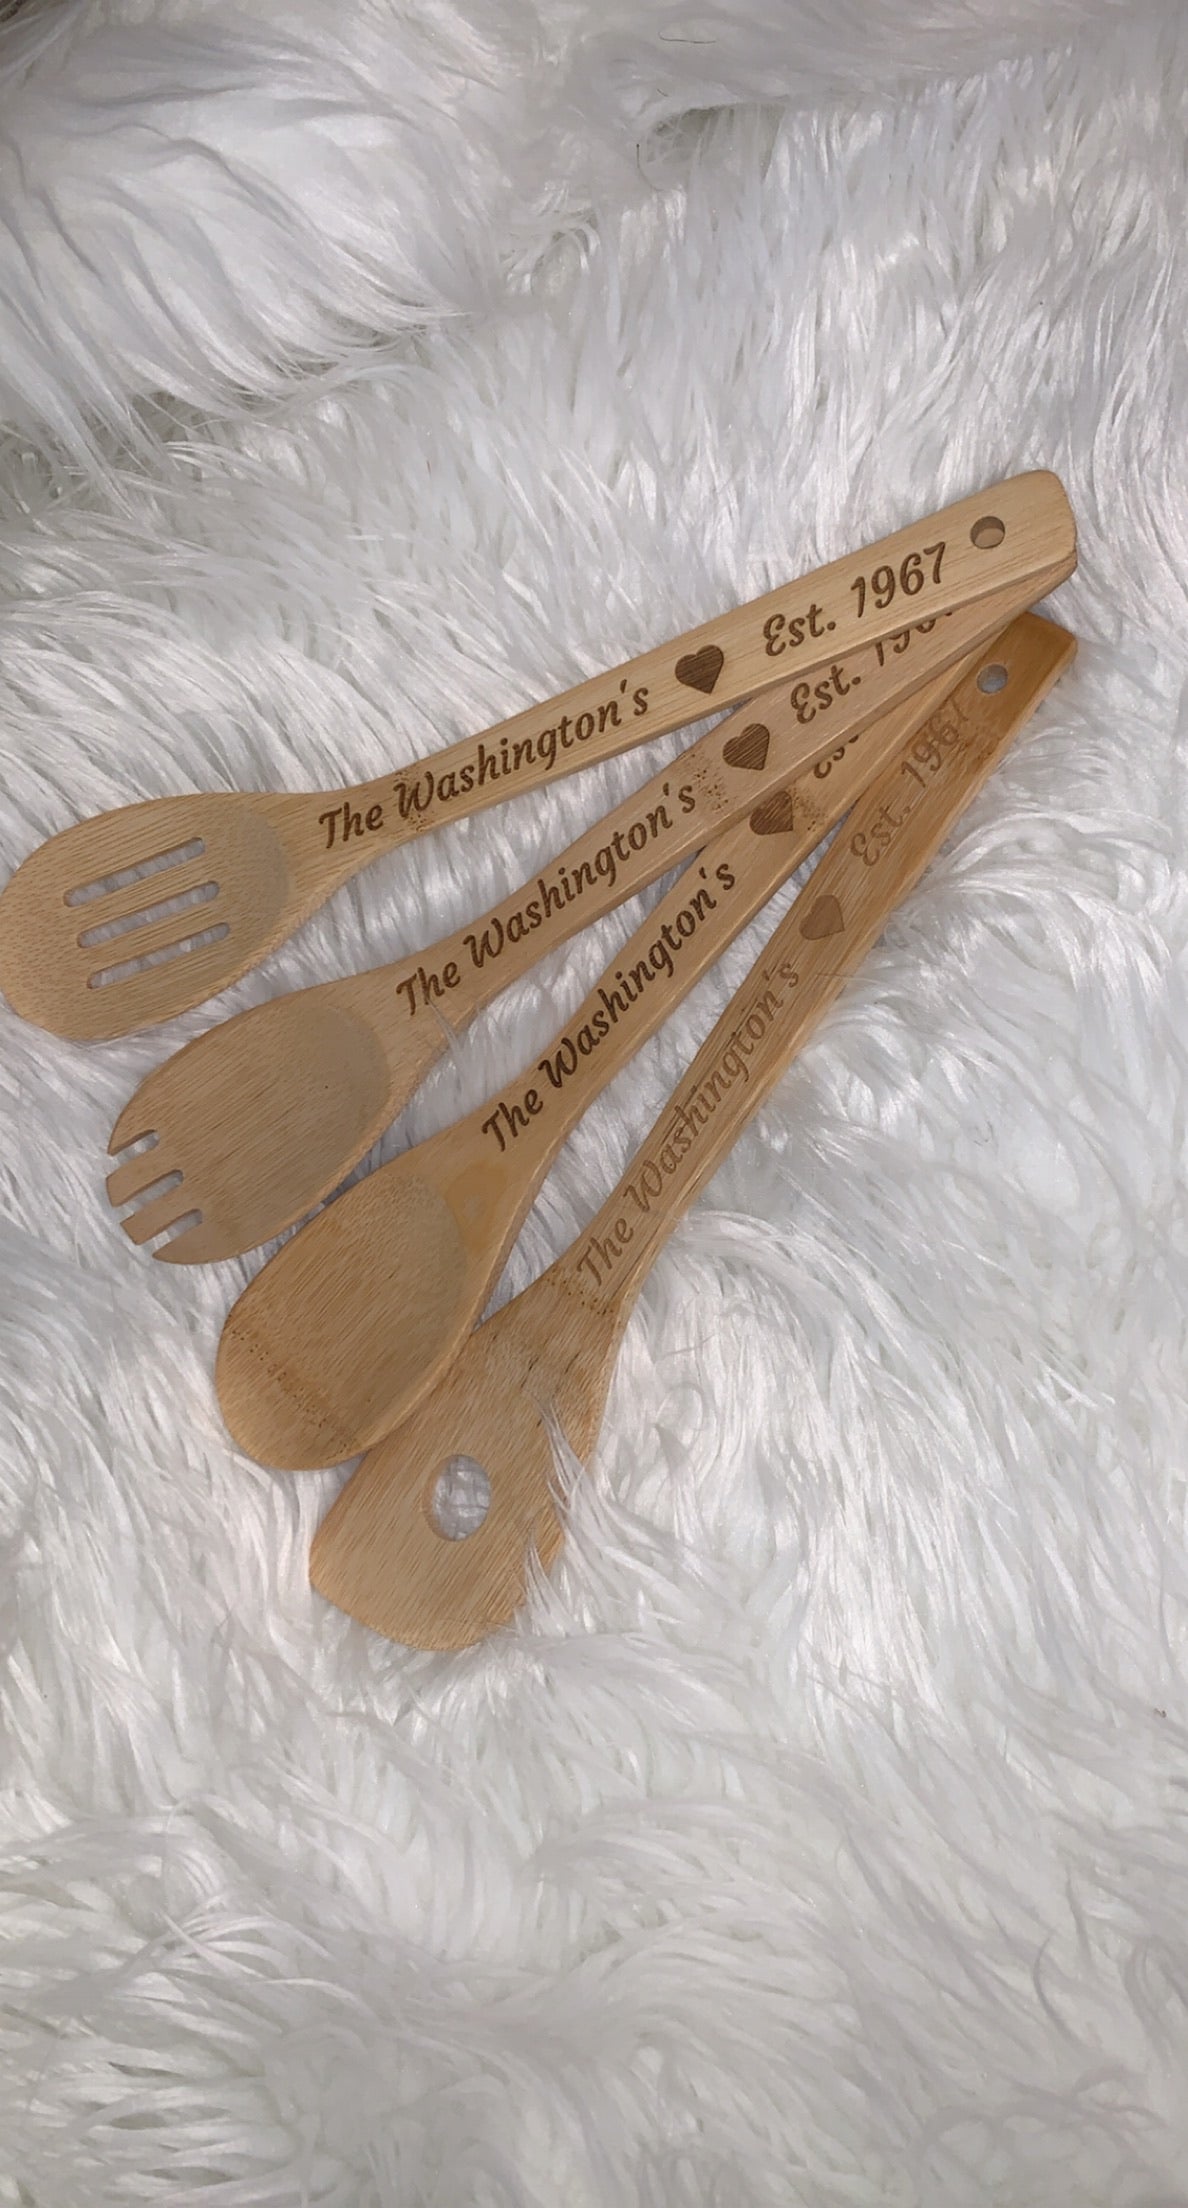 Personalized wooden spoons